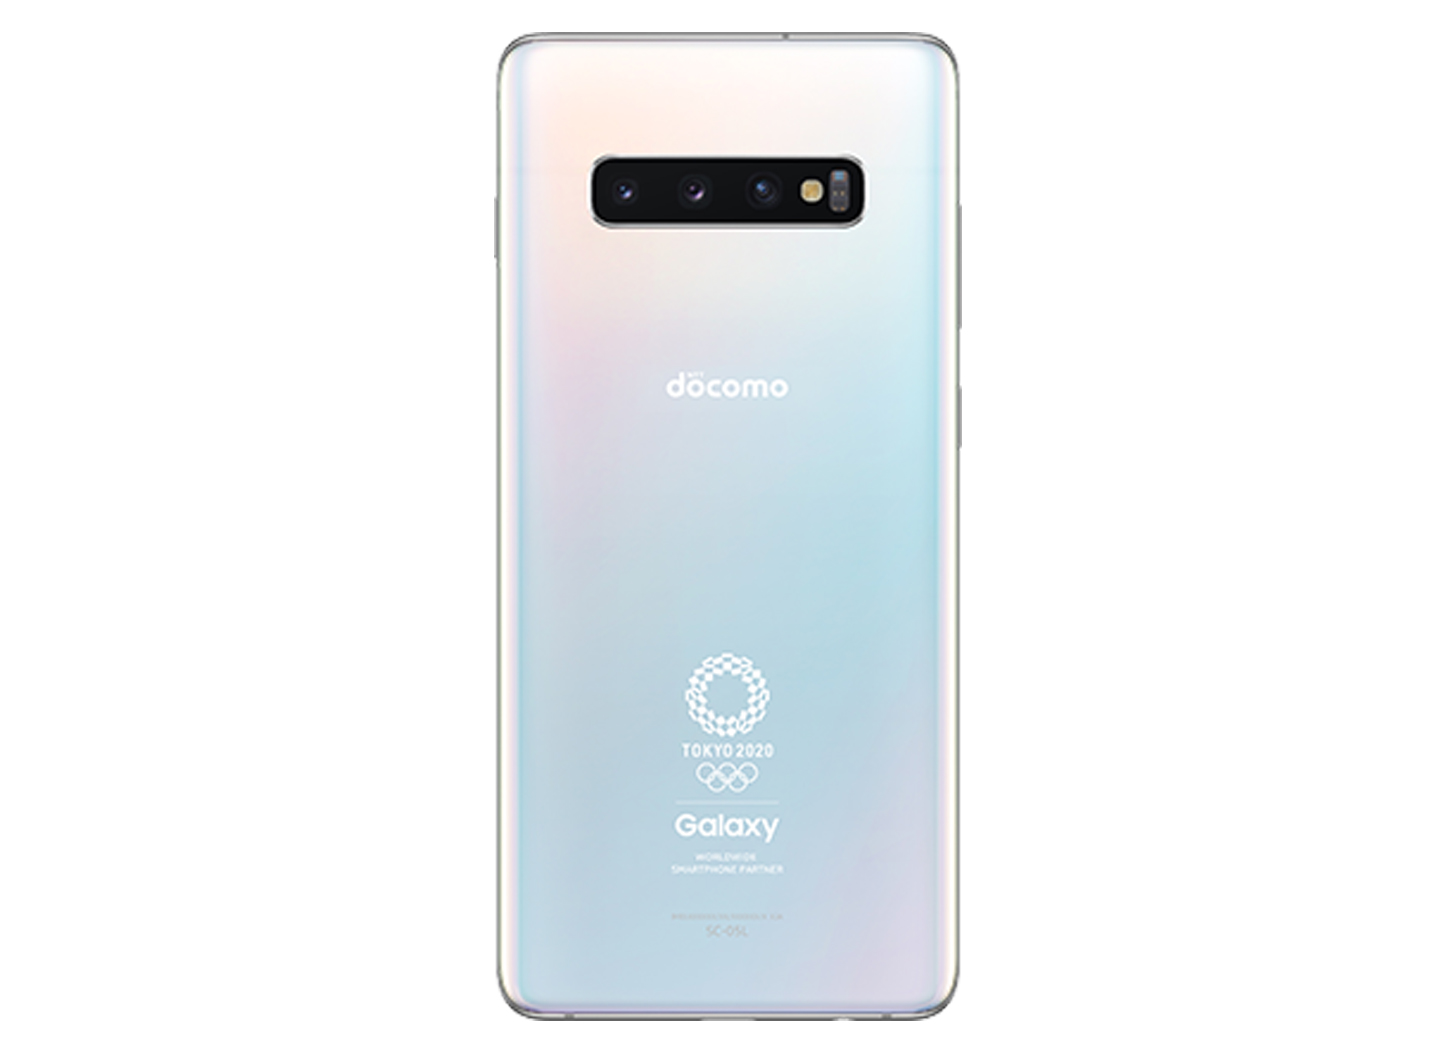 Samsung Galaxy S10+ gets special Olympic Games Edition model